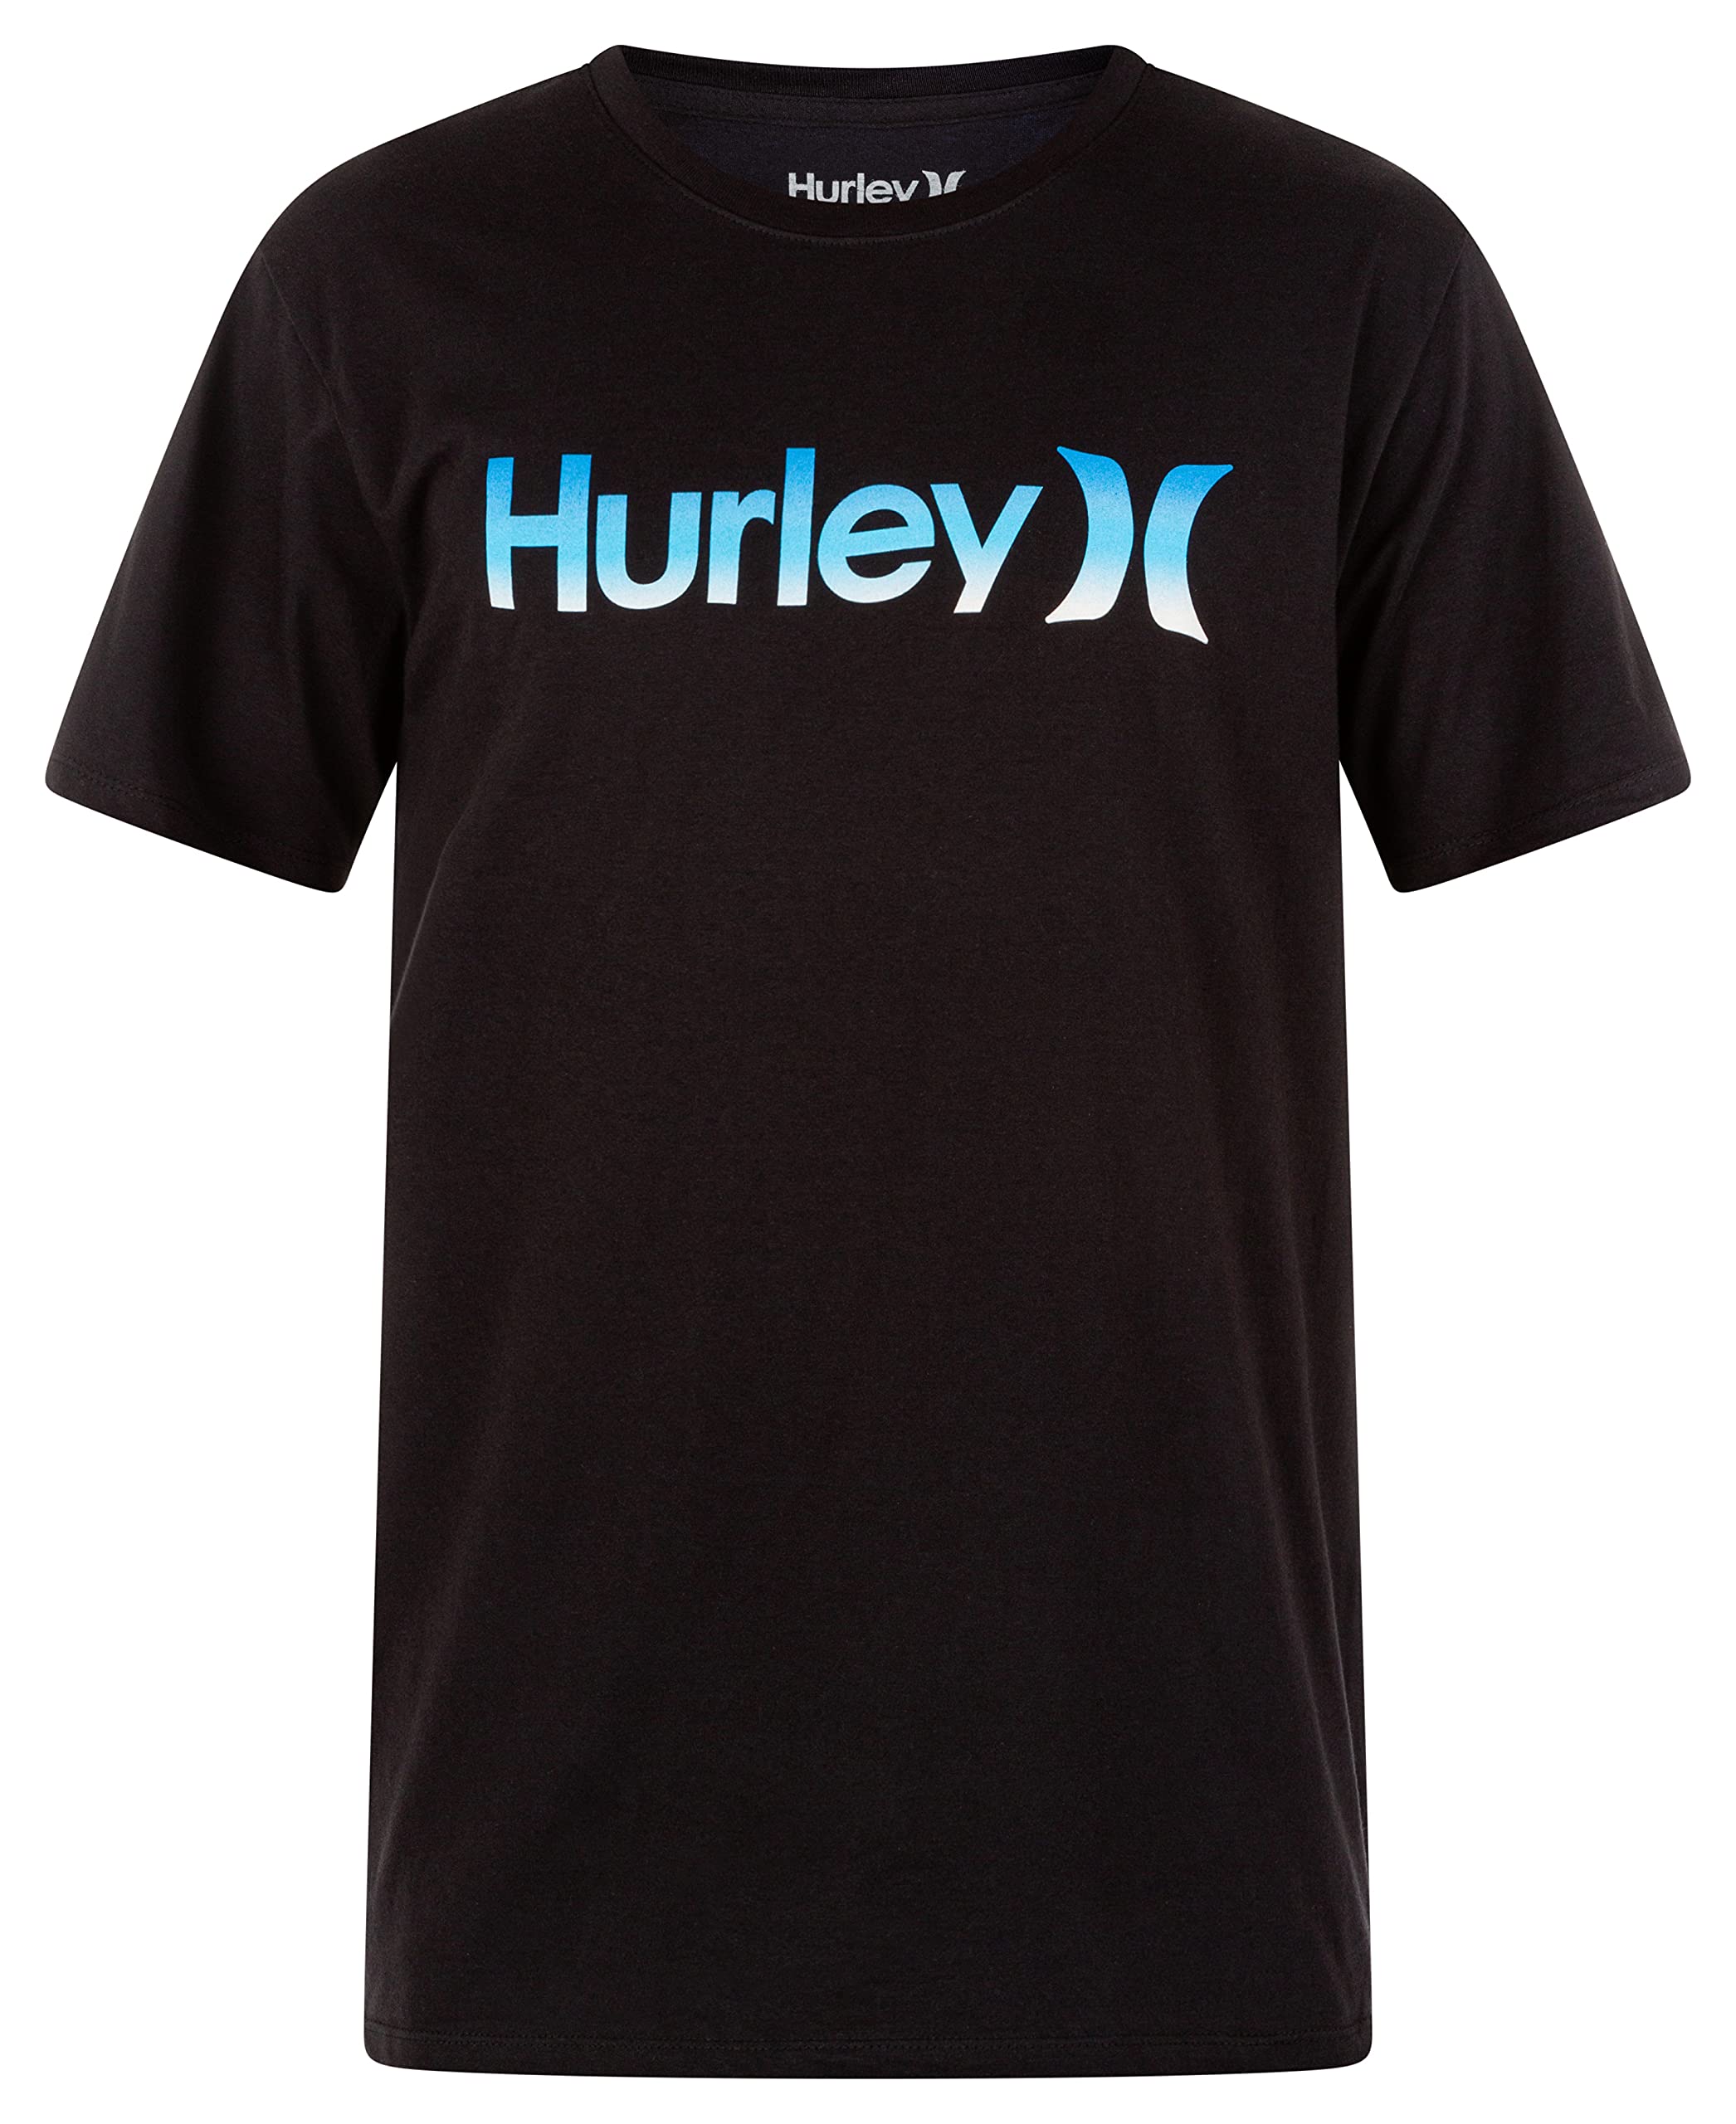 Hurley mens One and Only Logo T-shirt Shirt, Black, X-Large US